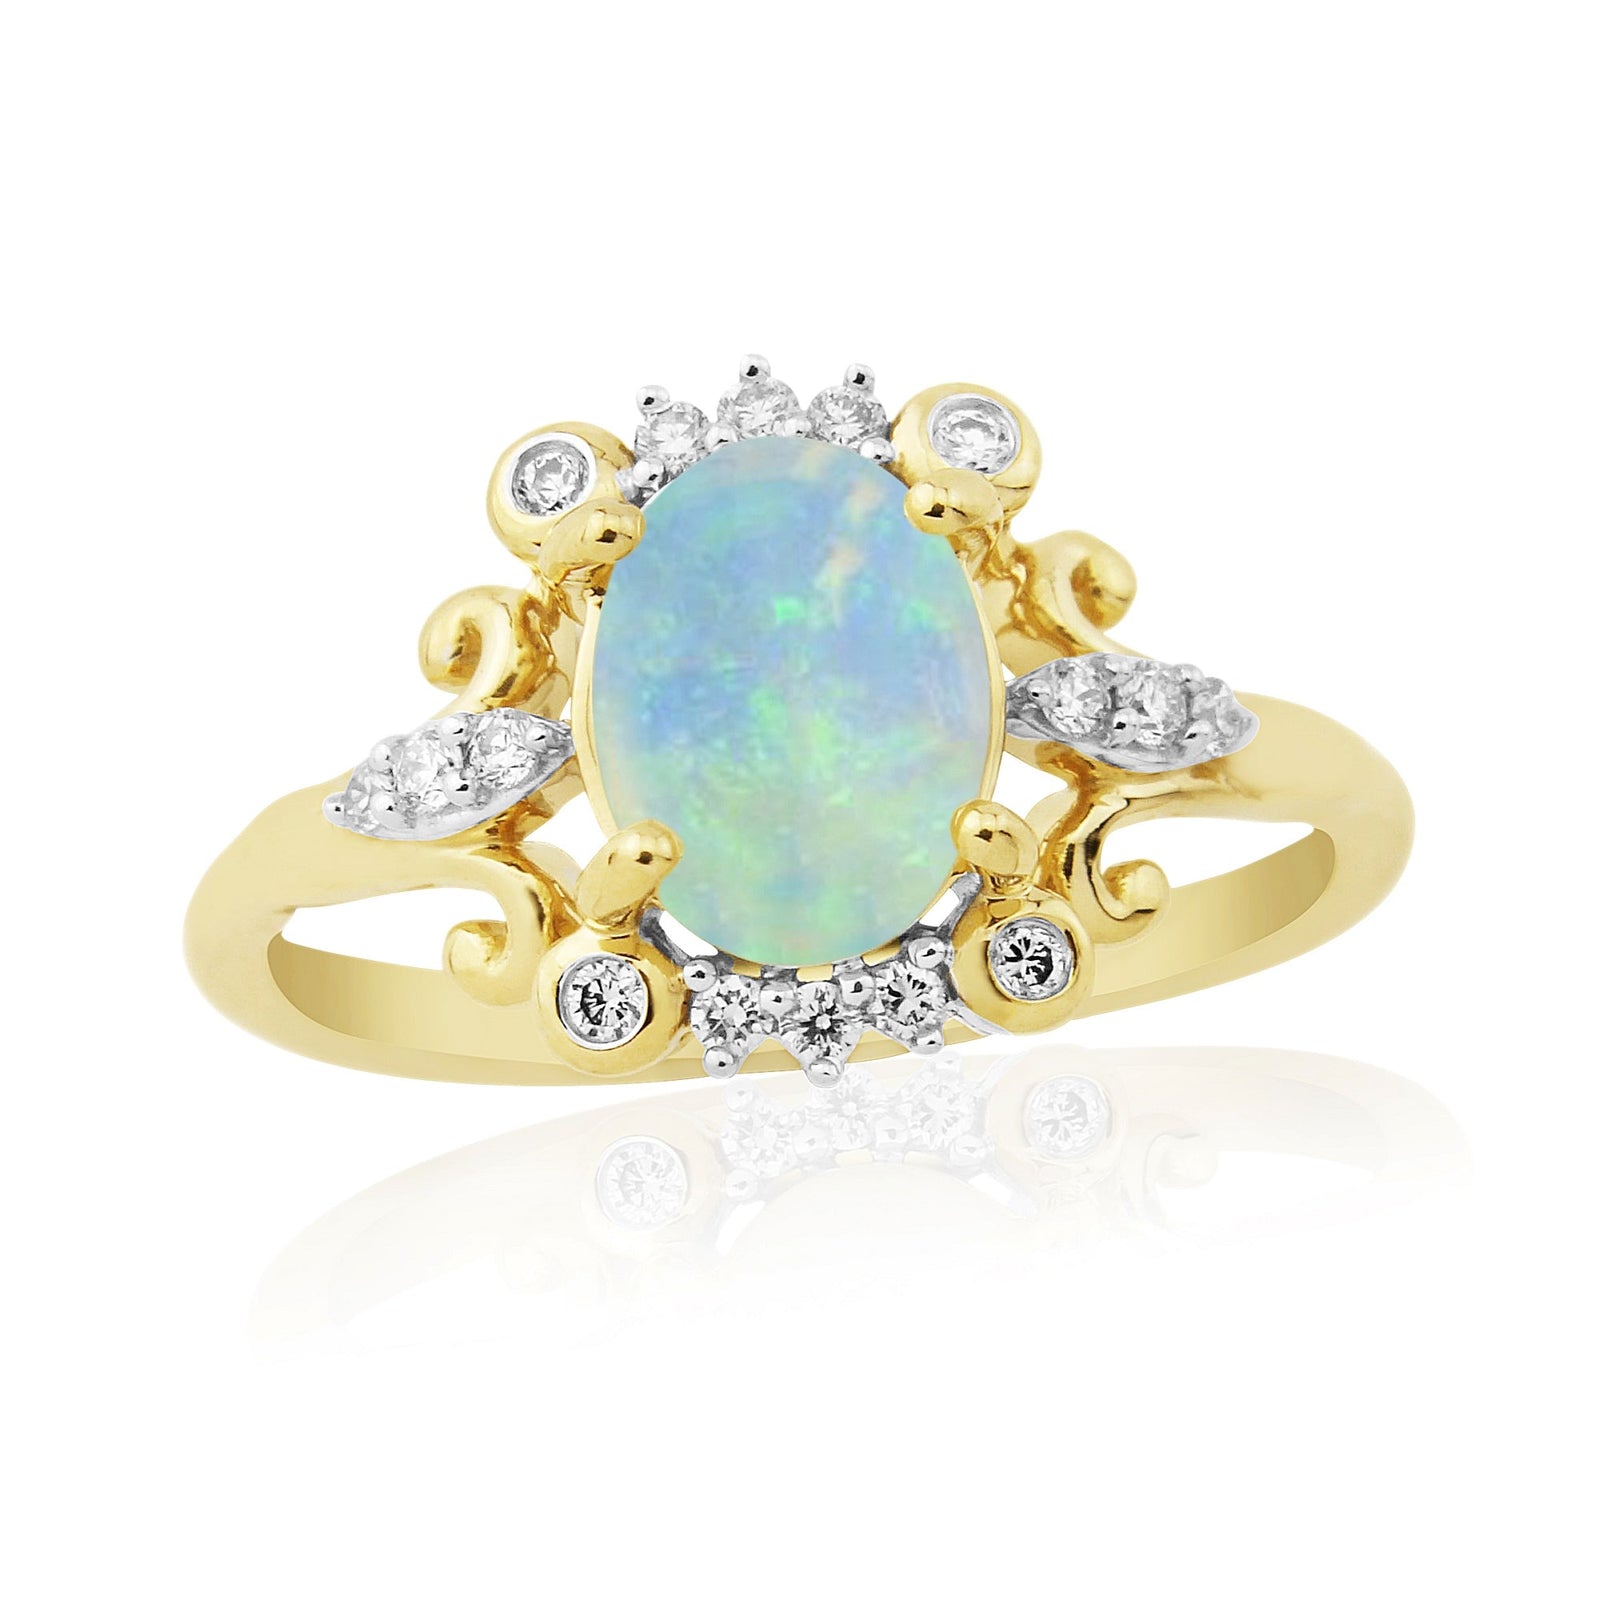 9ct gold 8x6mm oval opal & antique style diamond cluster ring 0.14ct